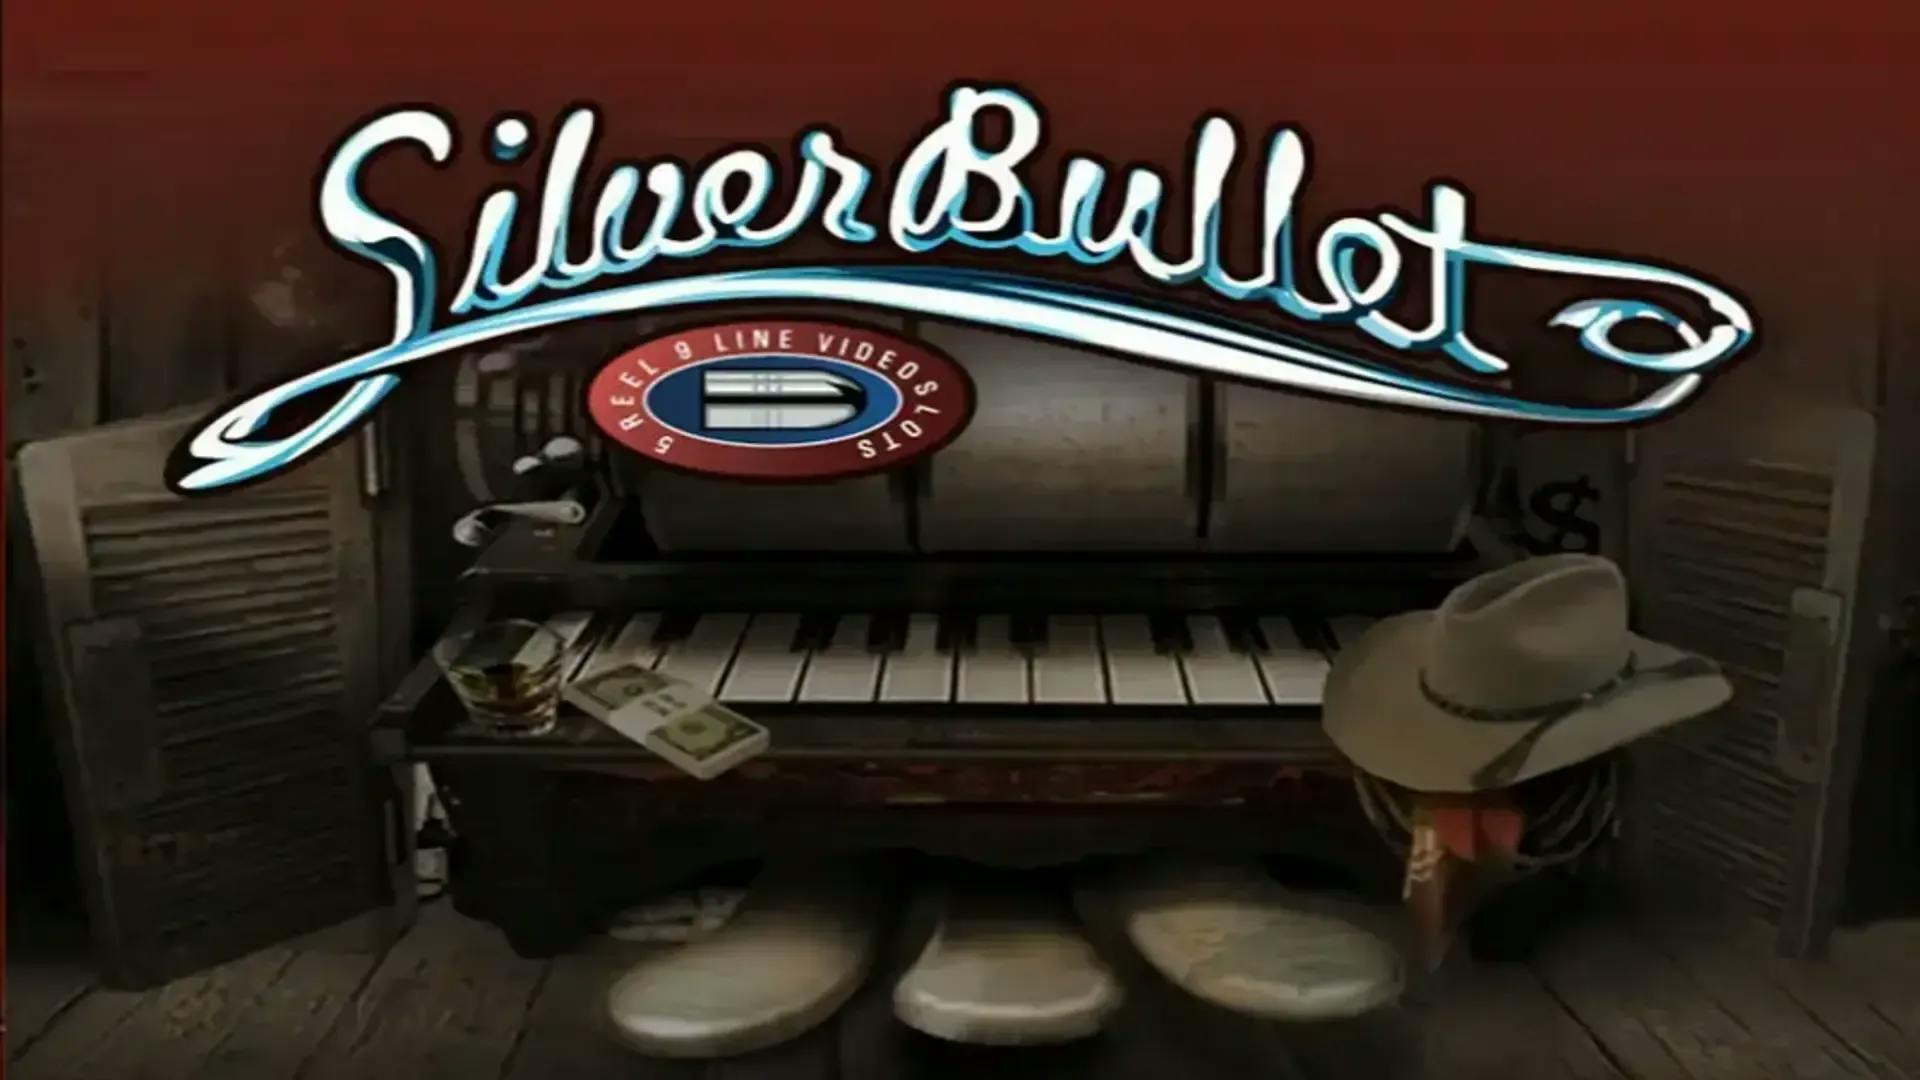 Silver Bullet Bandit Cash Collect Slot Machine Free Game Play